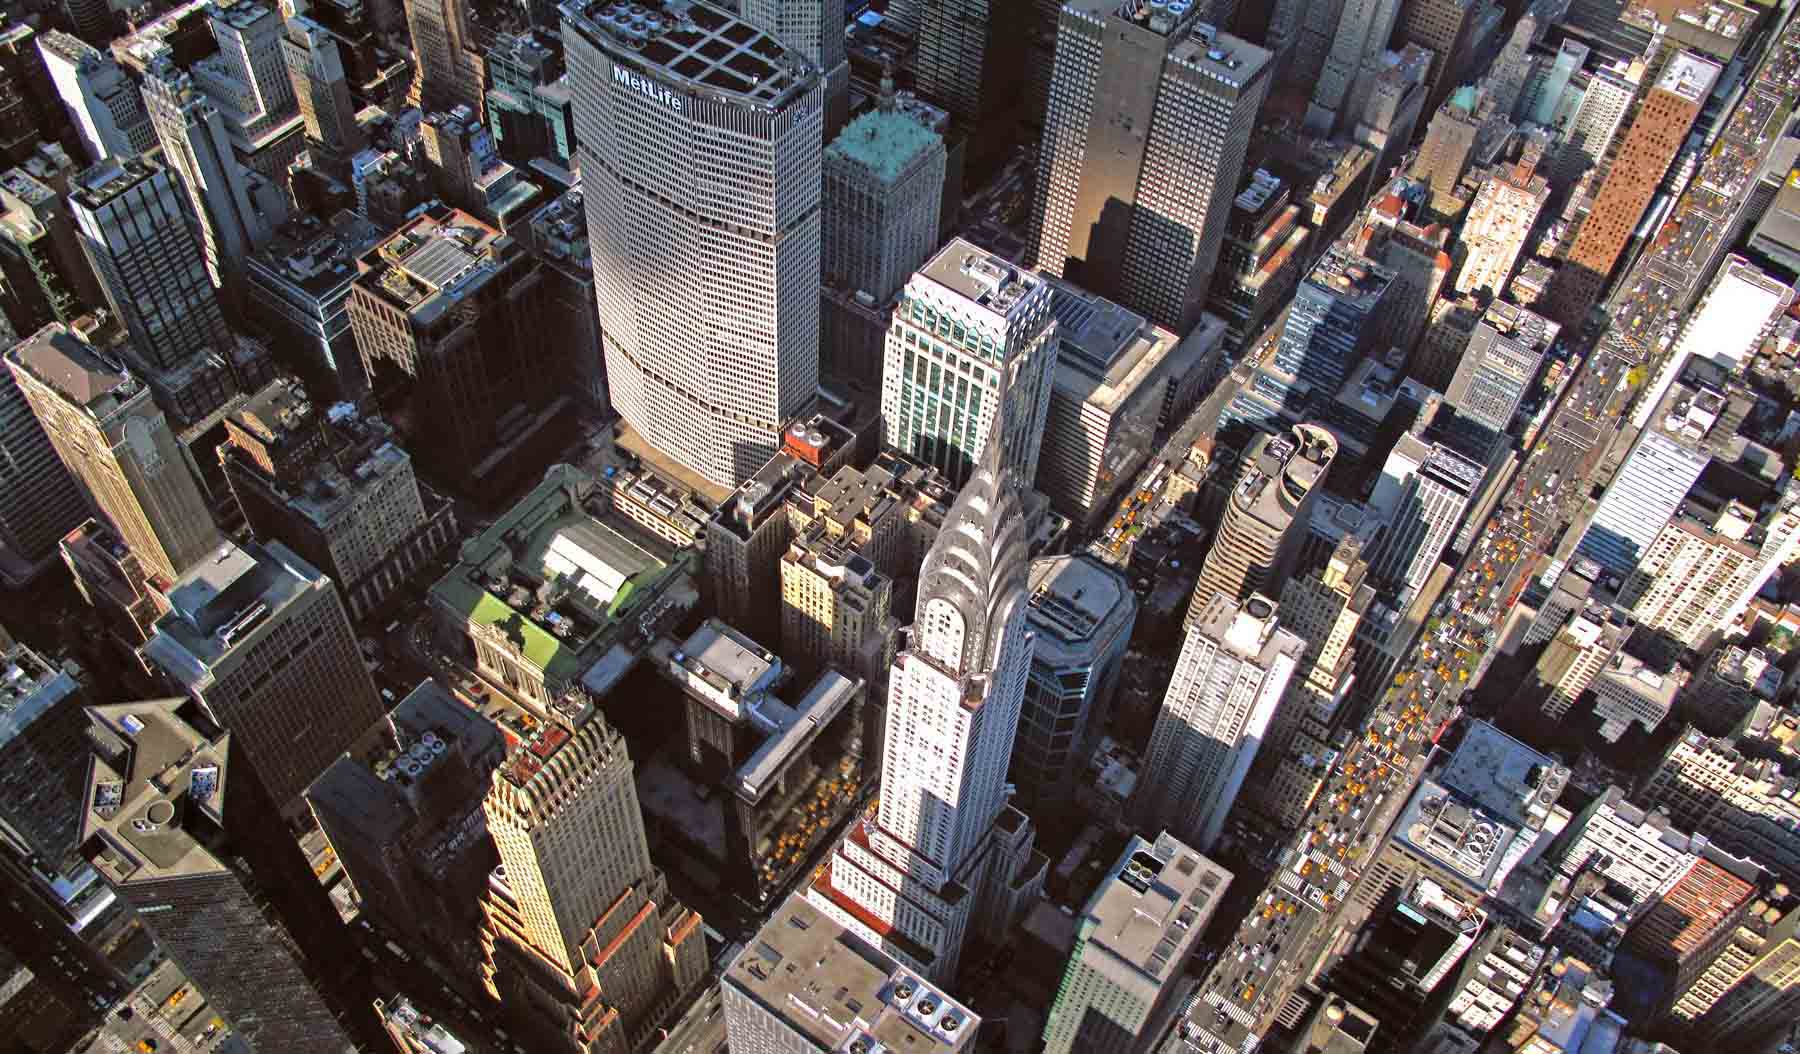 New York City’s Local Law 97 is fighting climate change, focusing on sustainable buildings